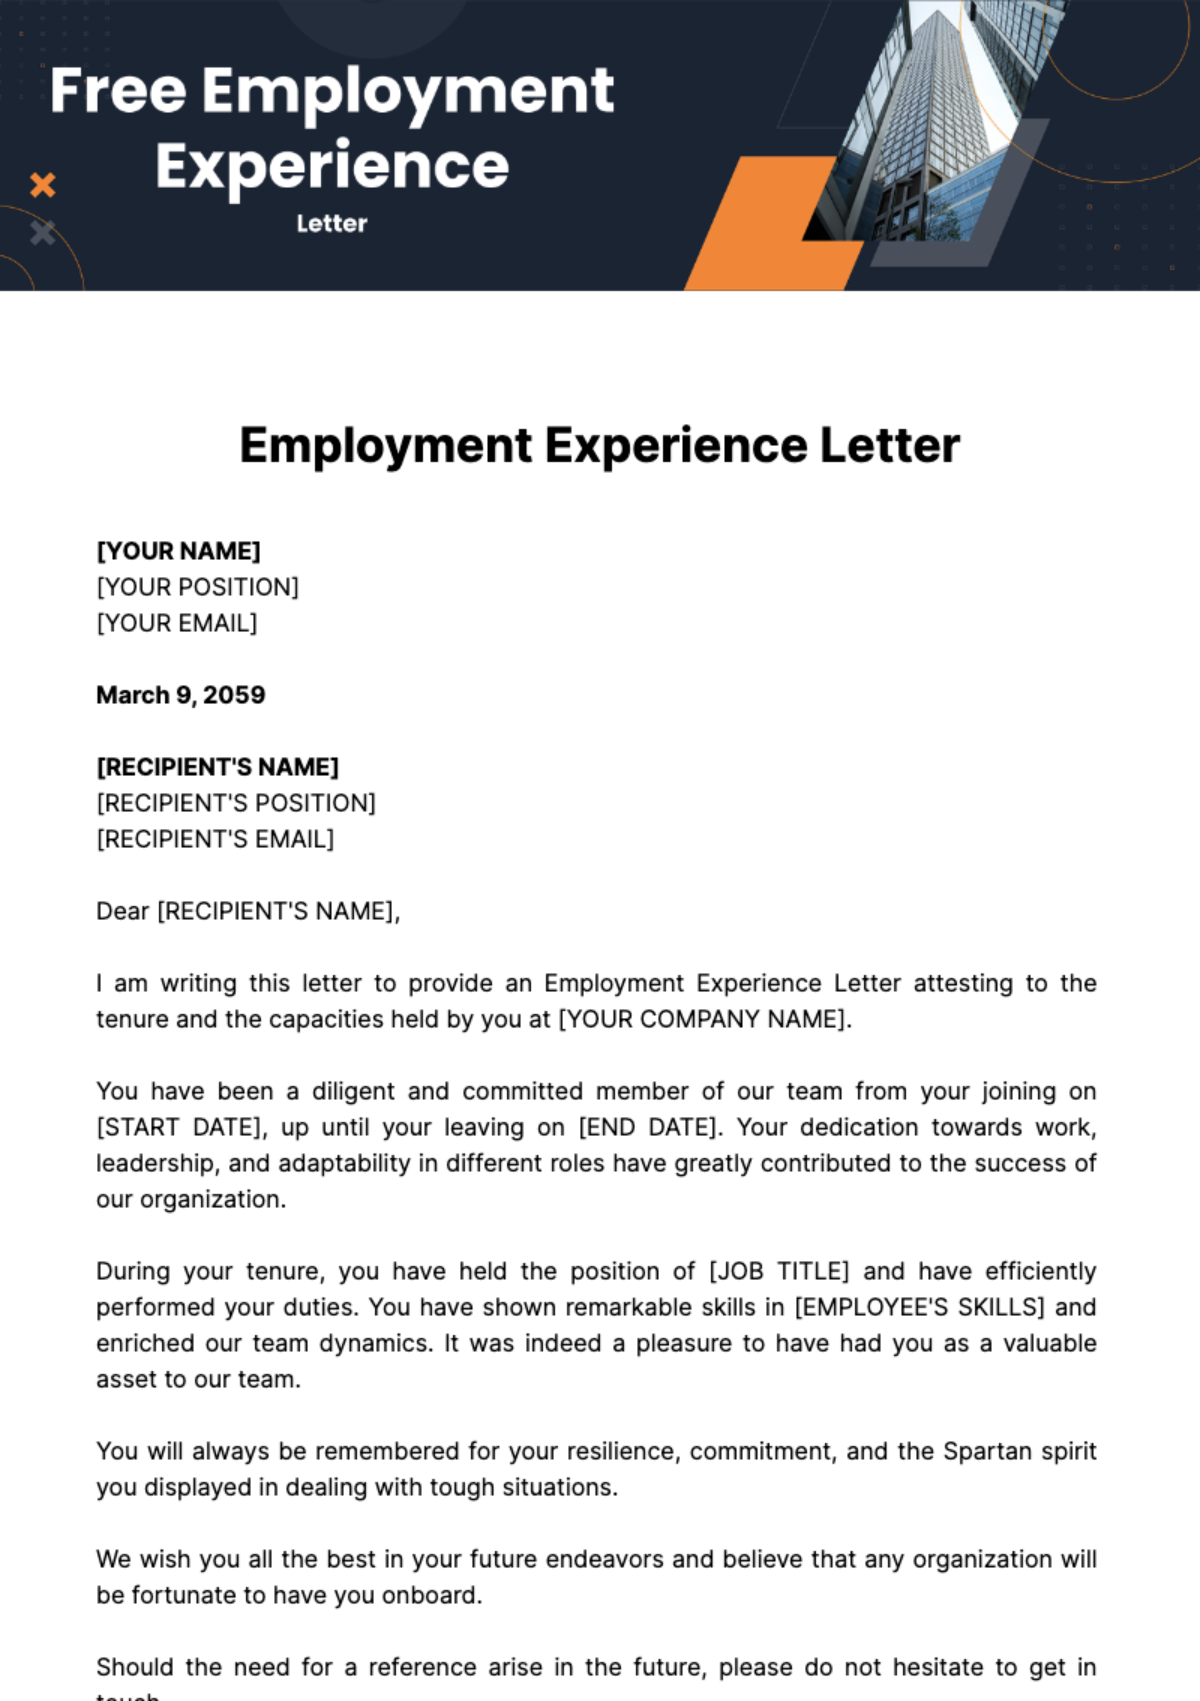 Free Employment Experience Letter Template